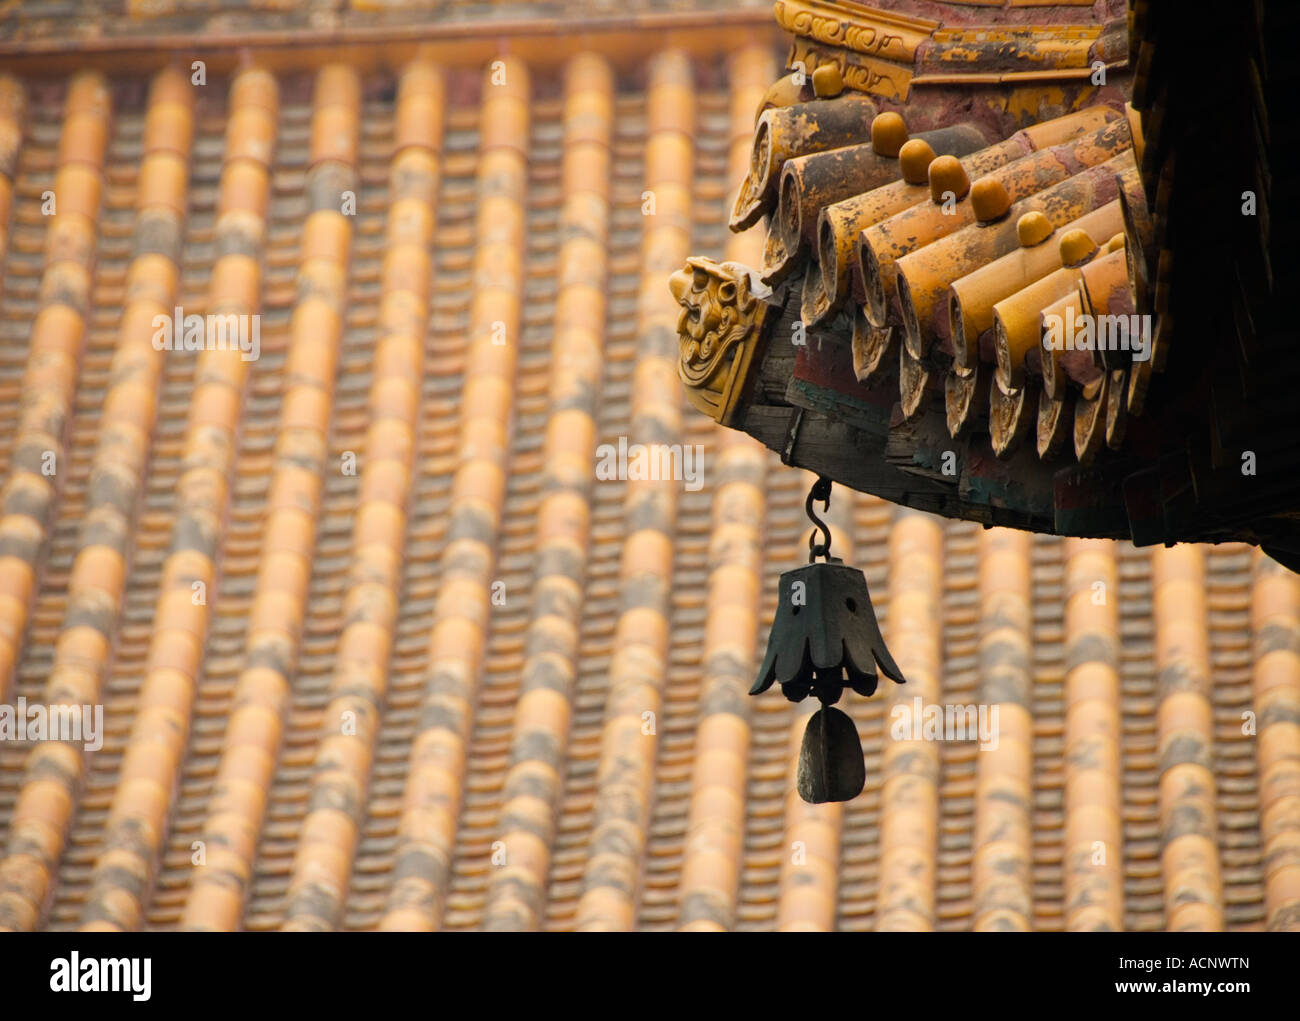 Bell and roof detail at Lama Temple Yonghegong in Beijing 2007 Stock Photo